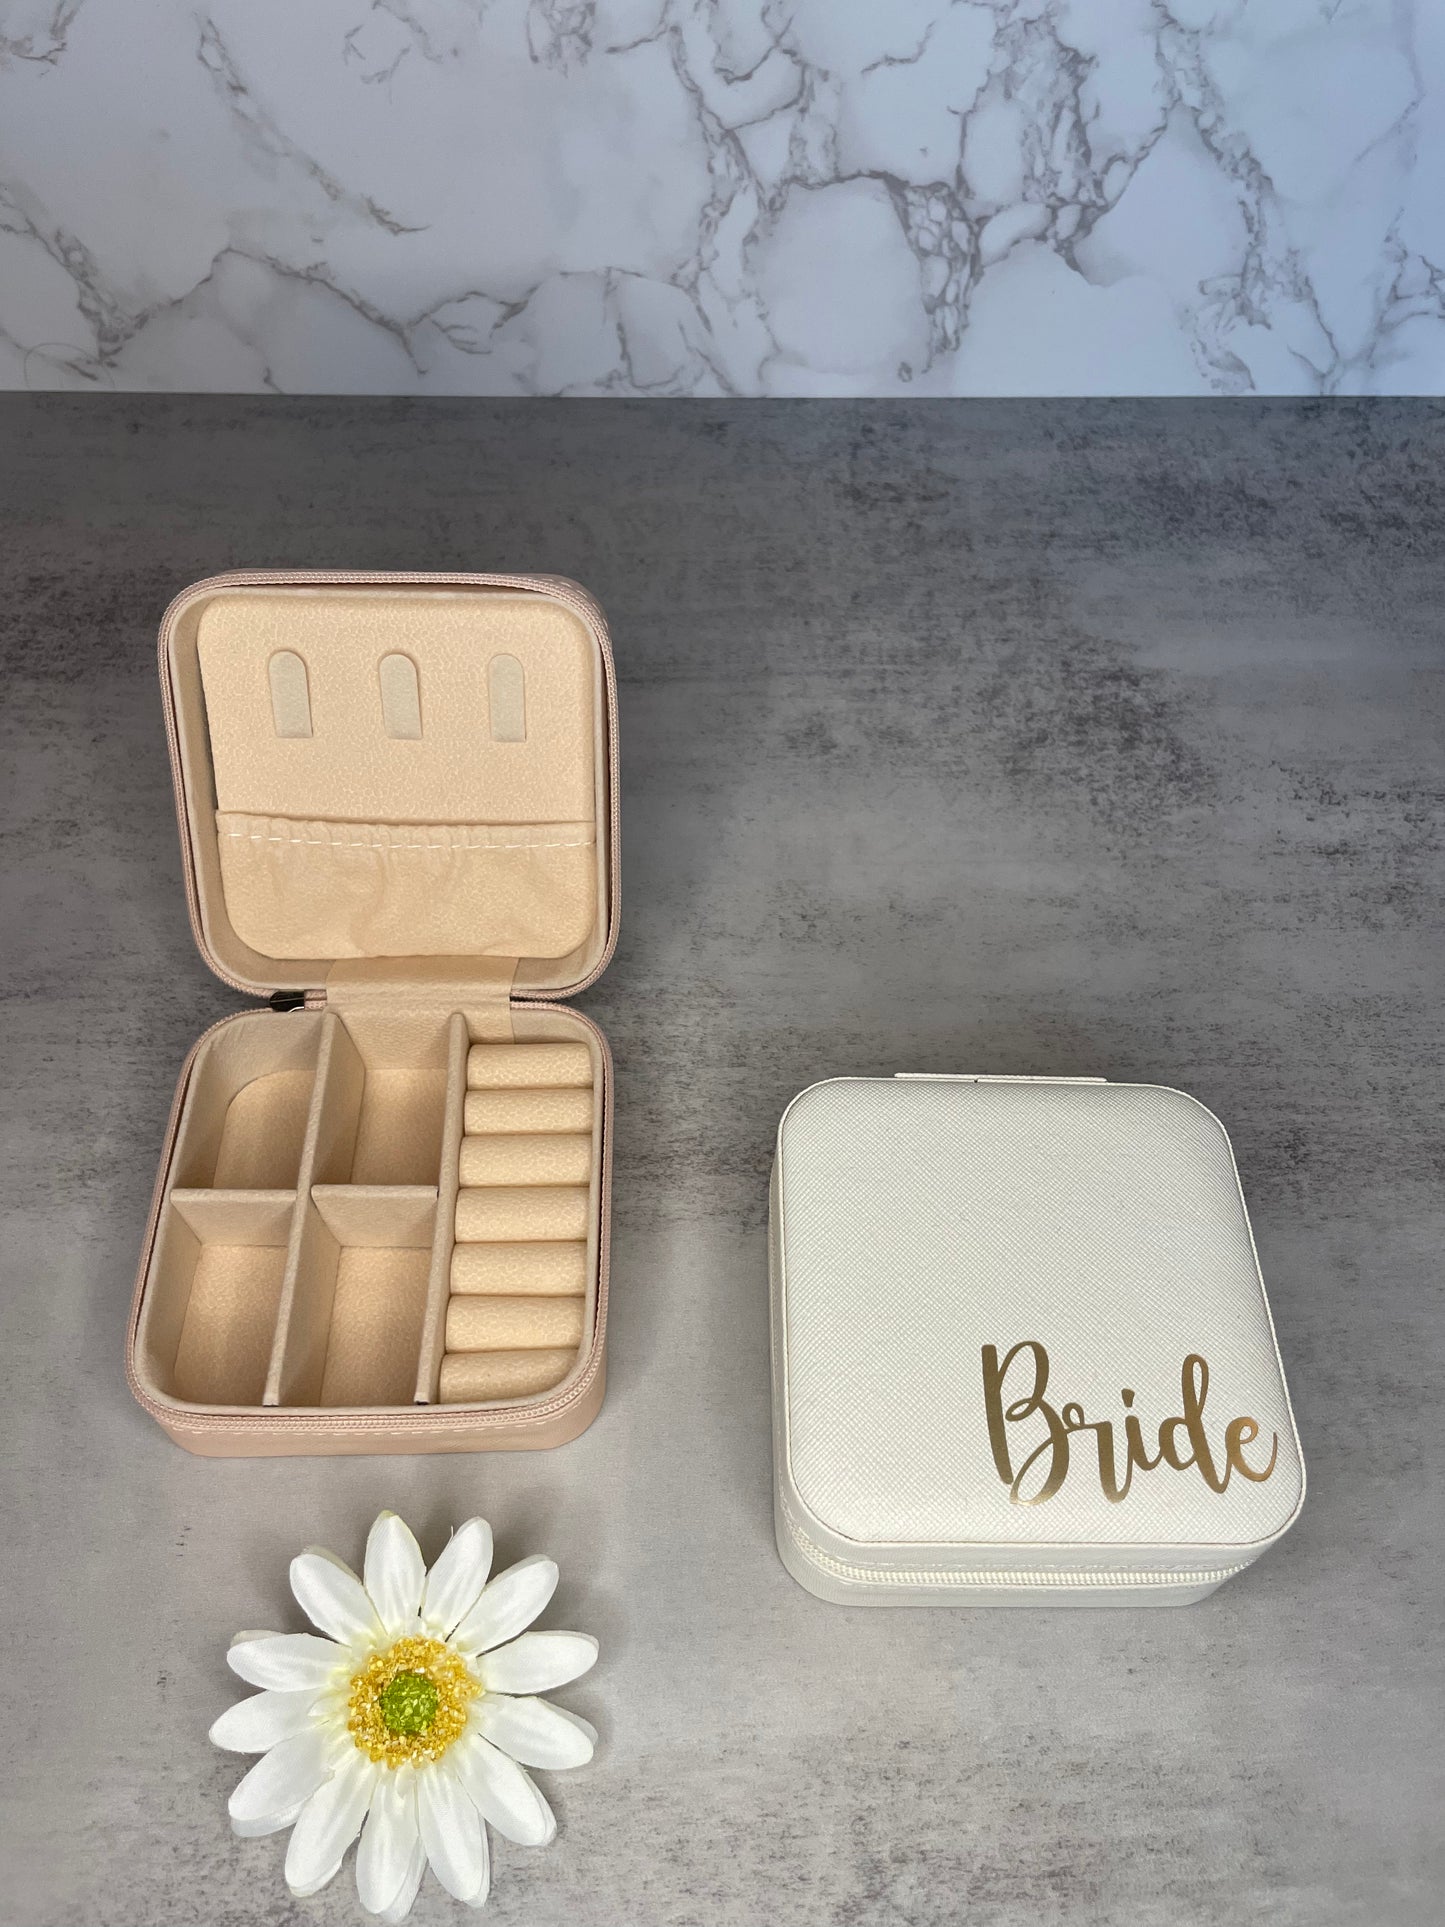 Jewelry Box, Travel Jewelry Case, Bridesmaid Gift, Mother’s Day Gift